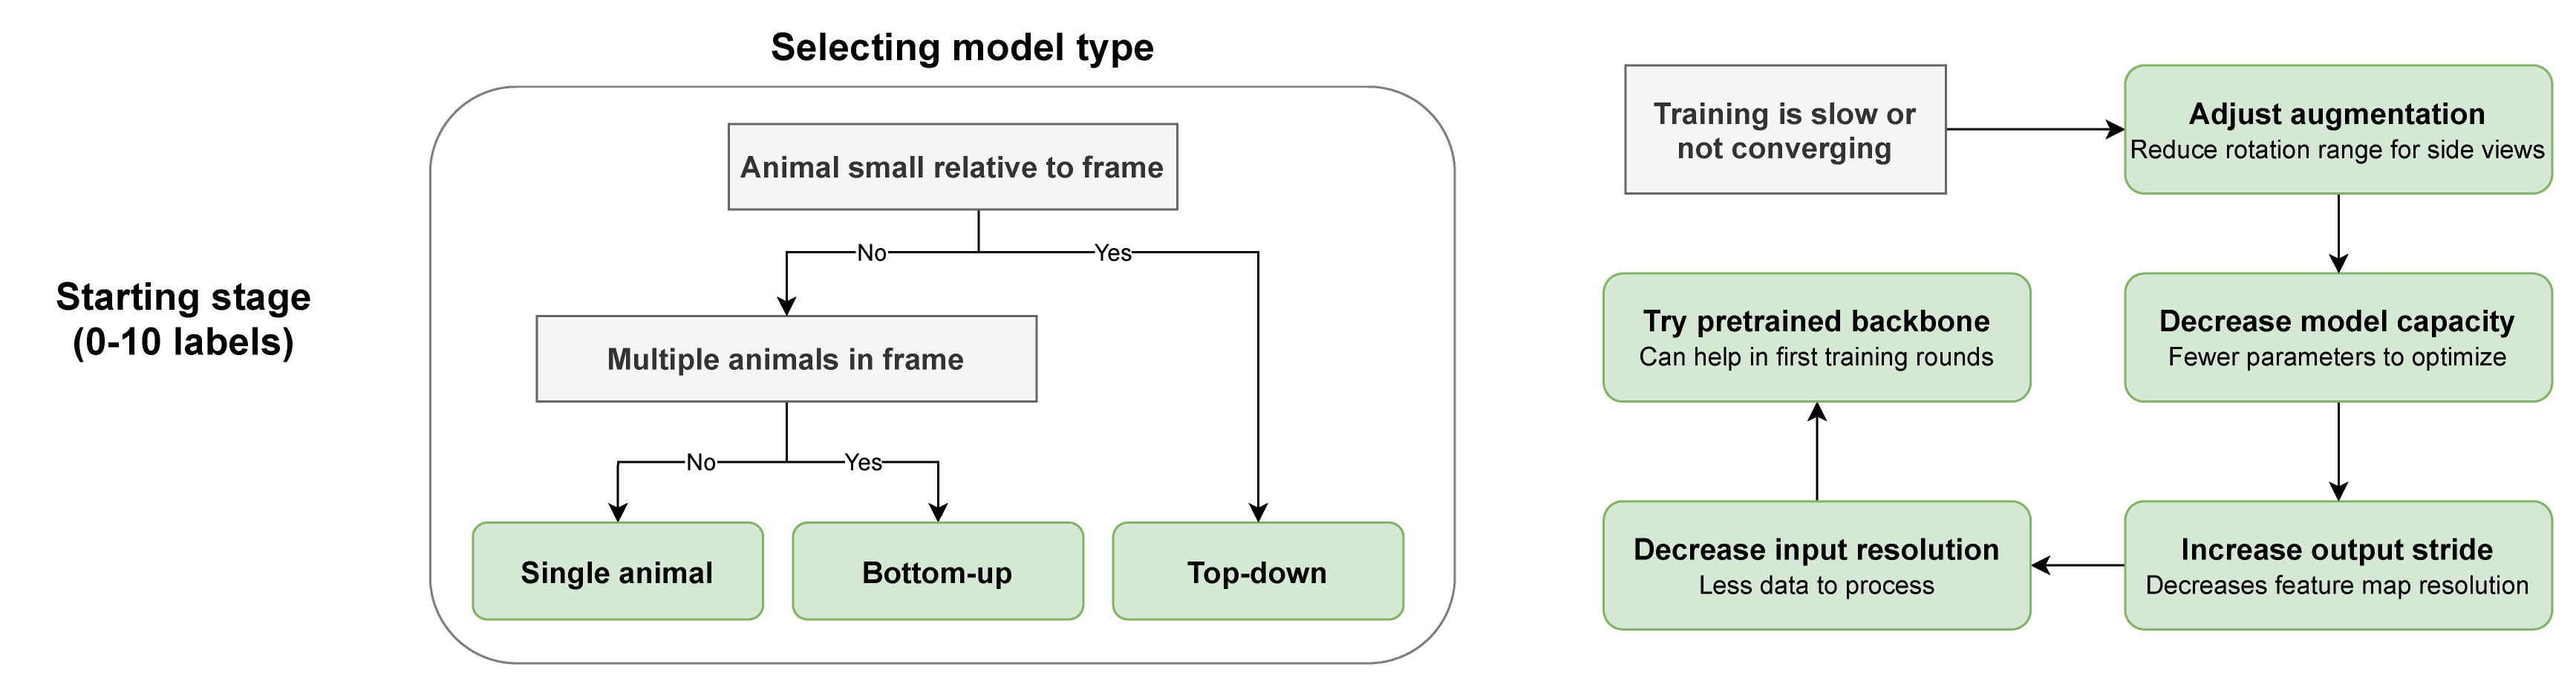 Stage 1 troubleshooting workflow